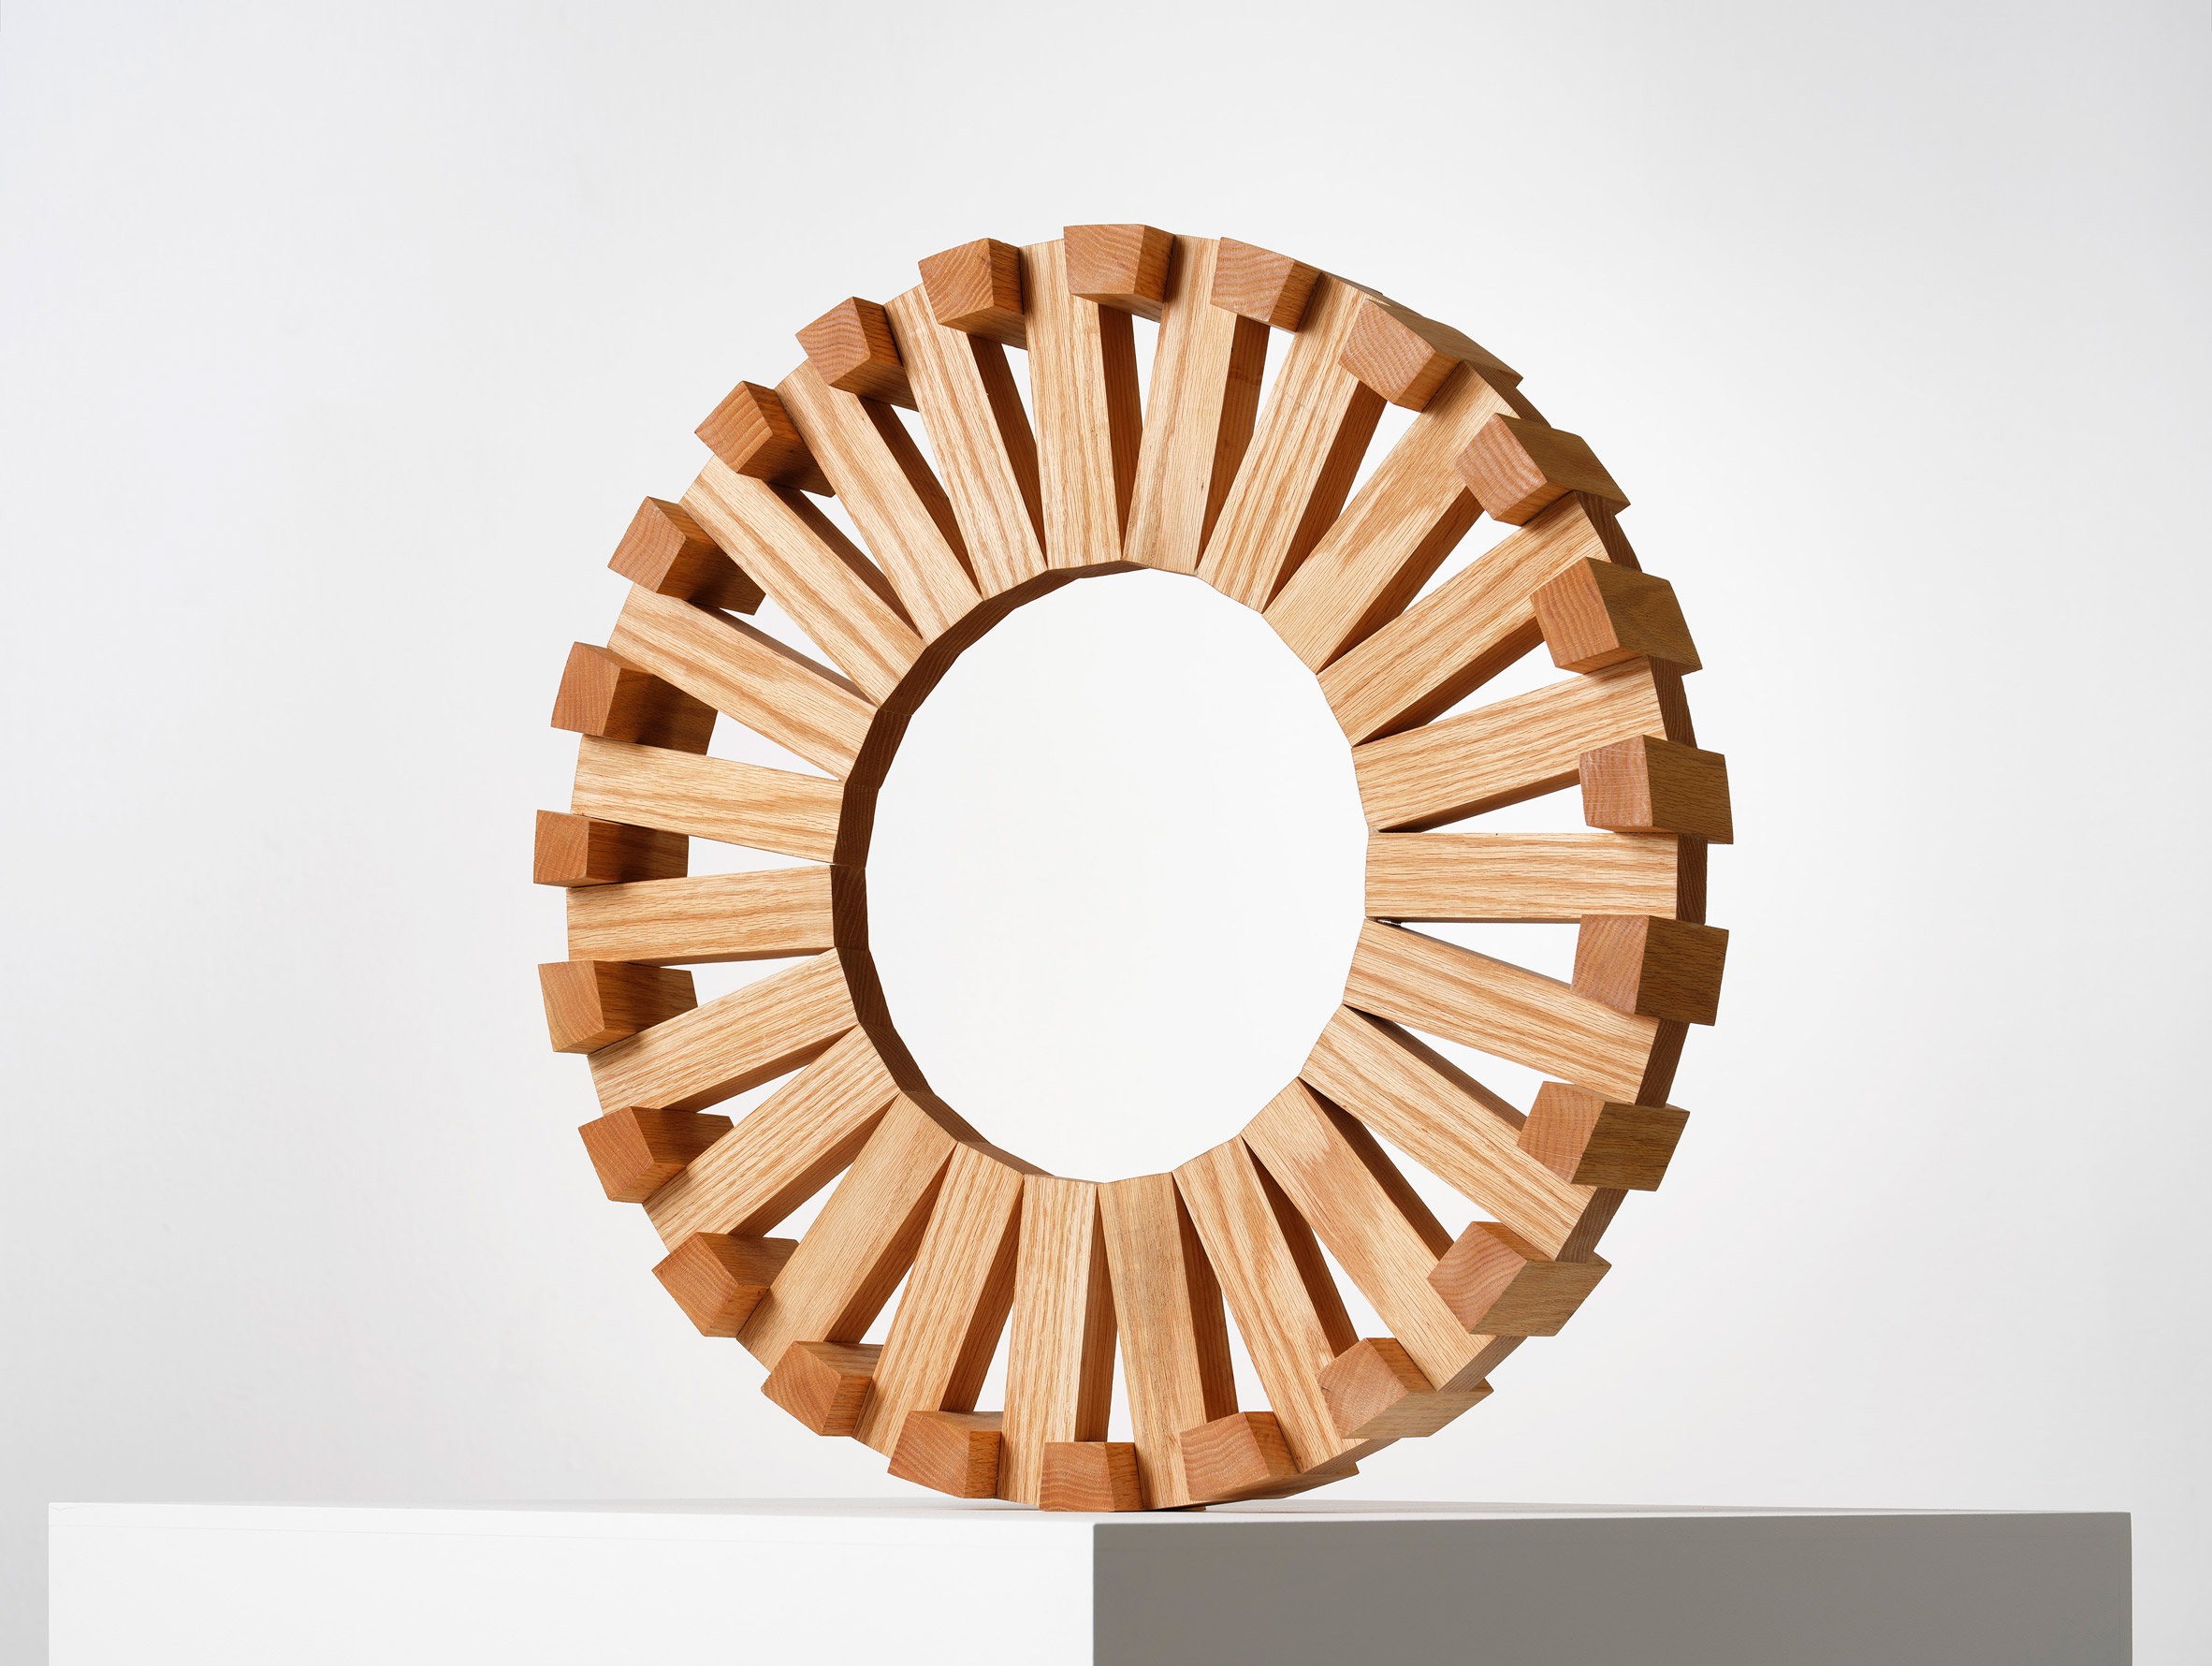 Red Oak Circuit, a wooden sculptural form in a gallery